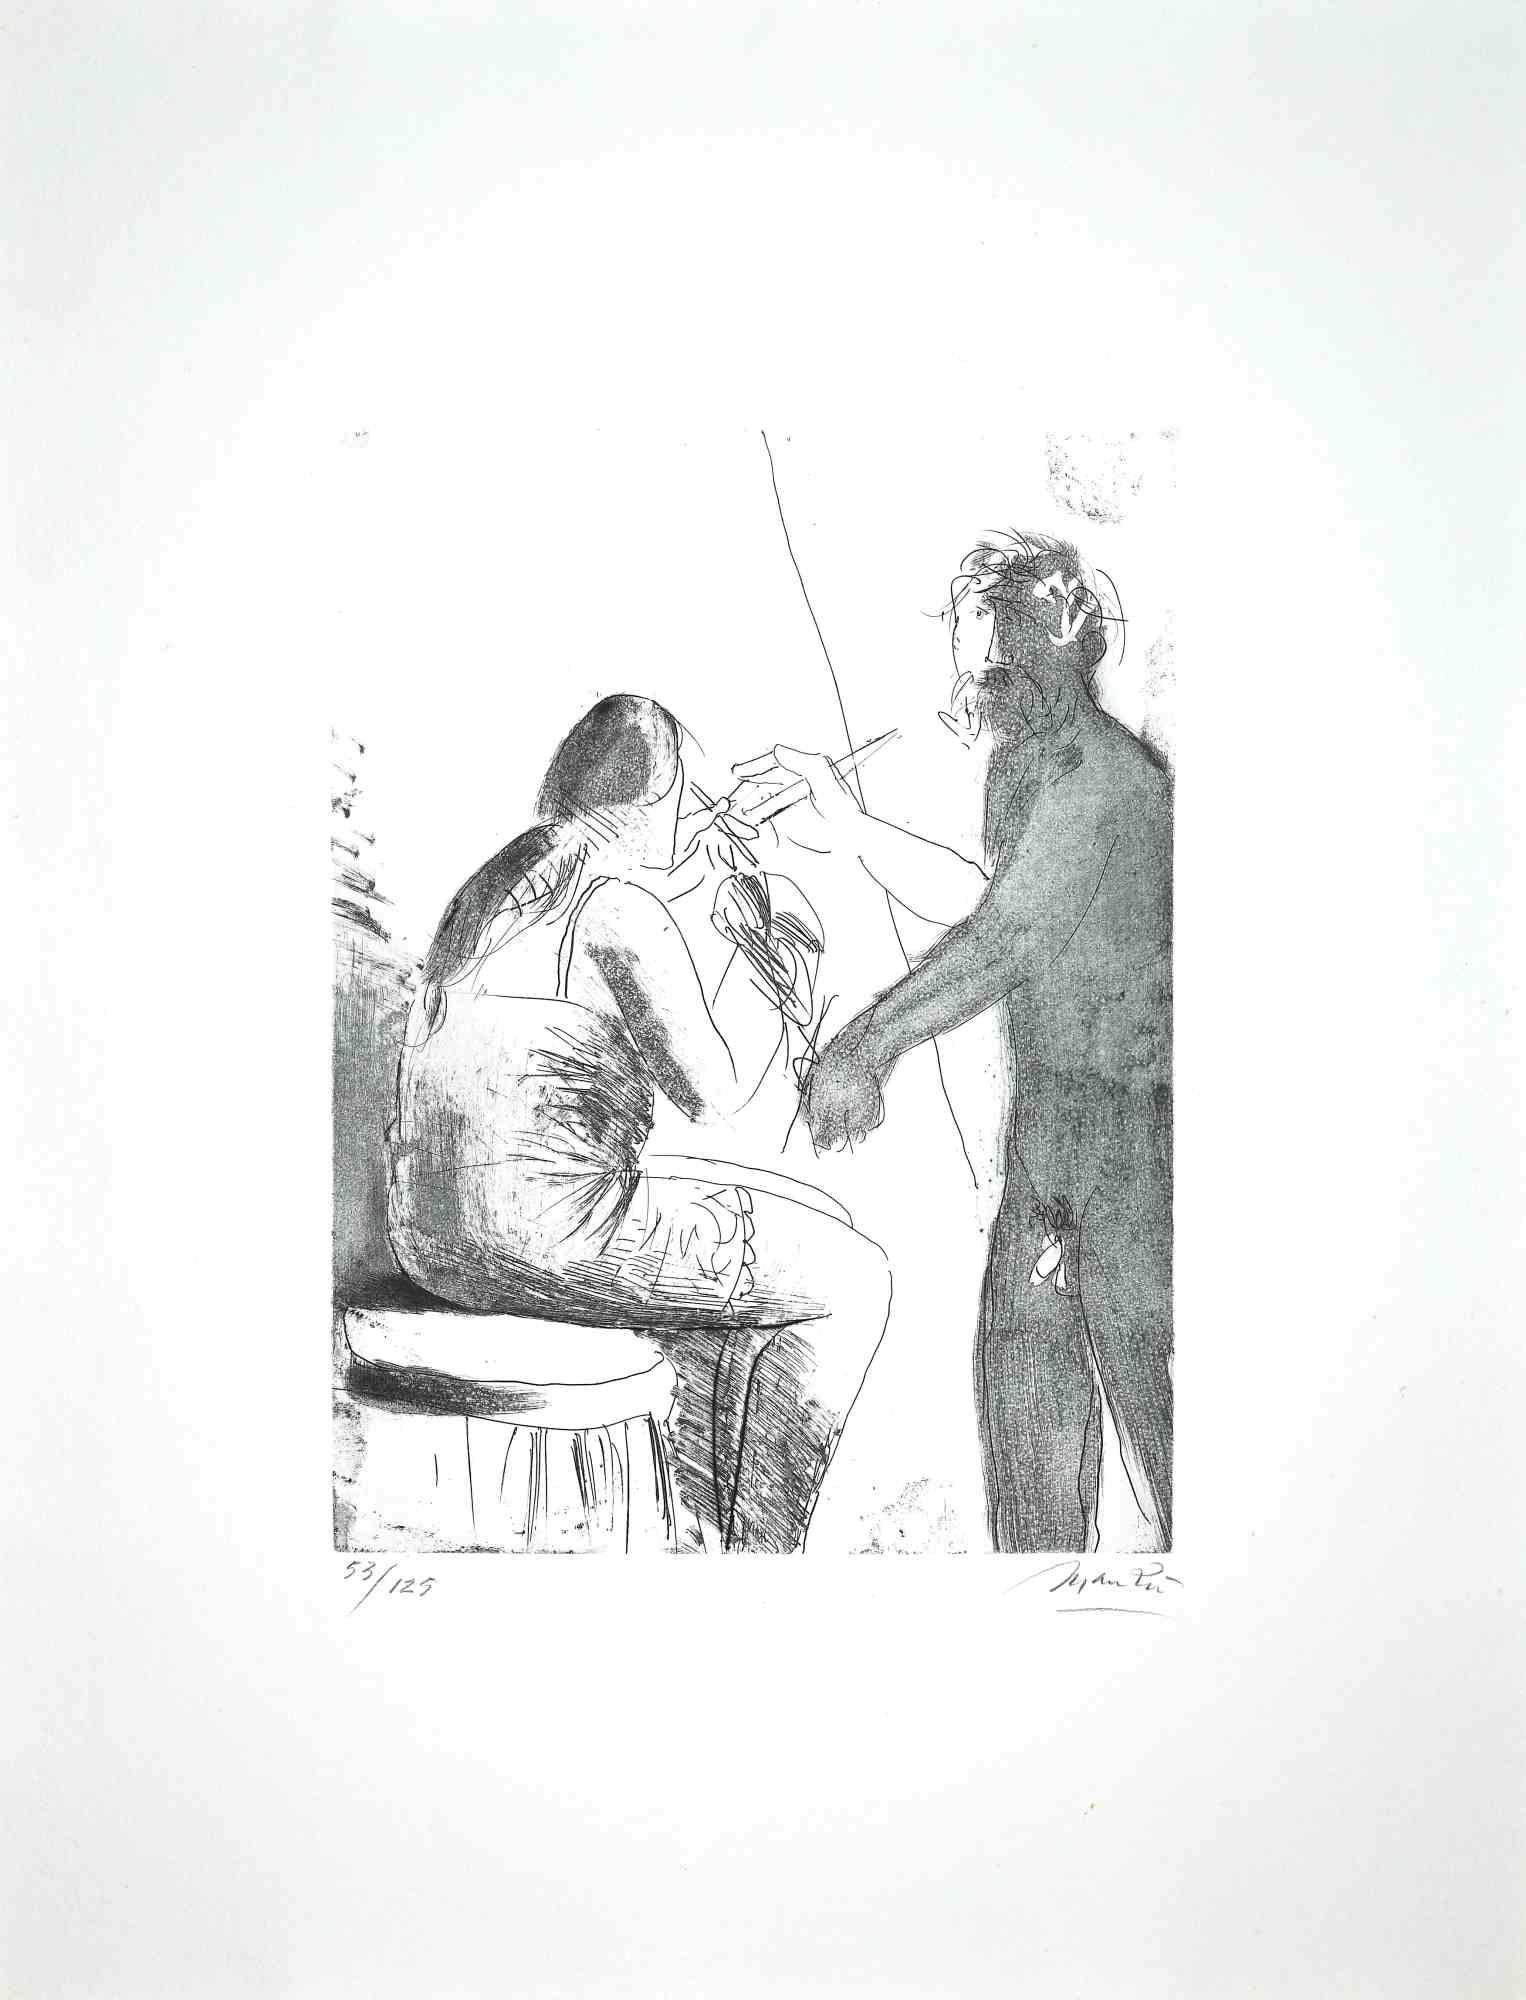 In the Atelier - Etching by Giacomo Manzù - 1968